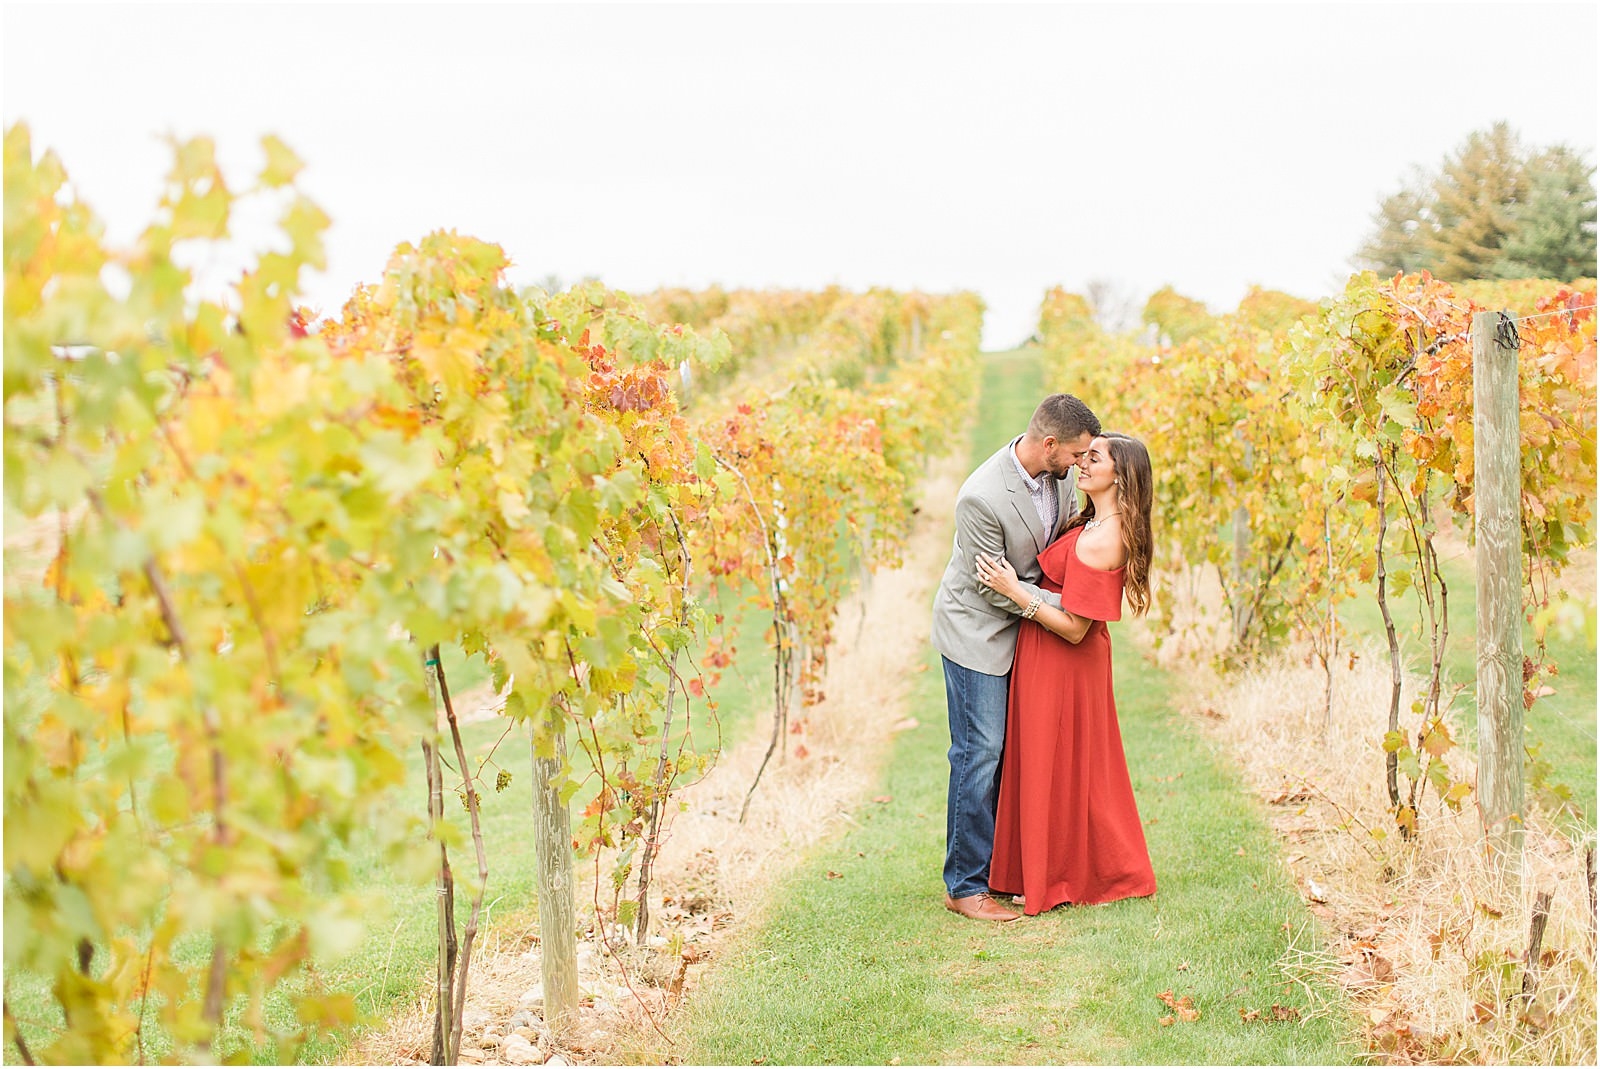 A Fall Oliver Winery Engagement Session | Sally and Andrew | Bret and Brandie Photography 0022.jpg